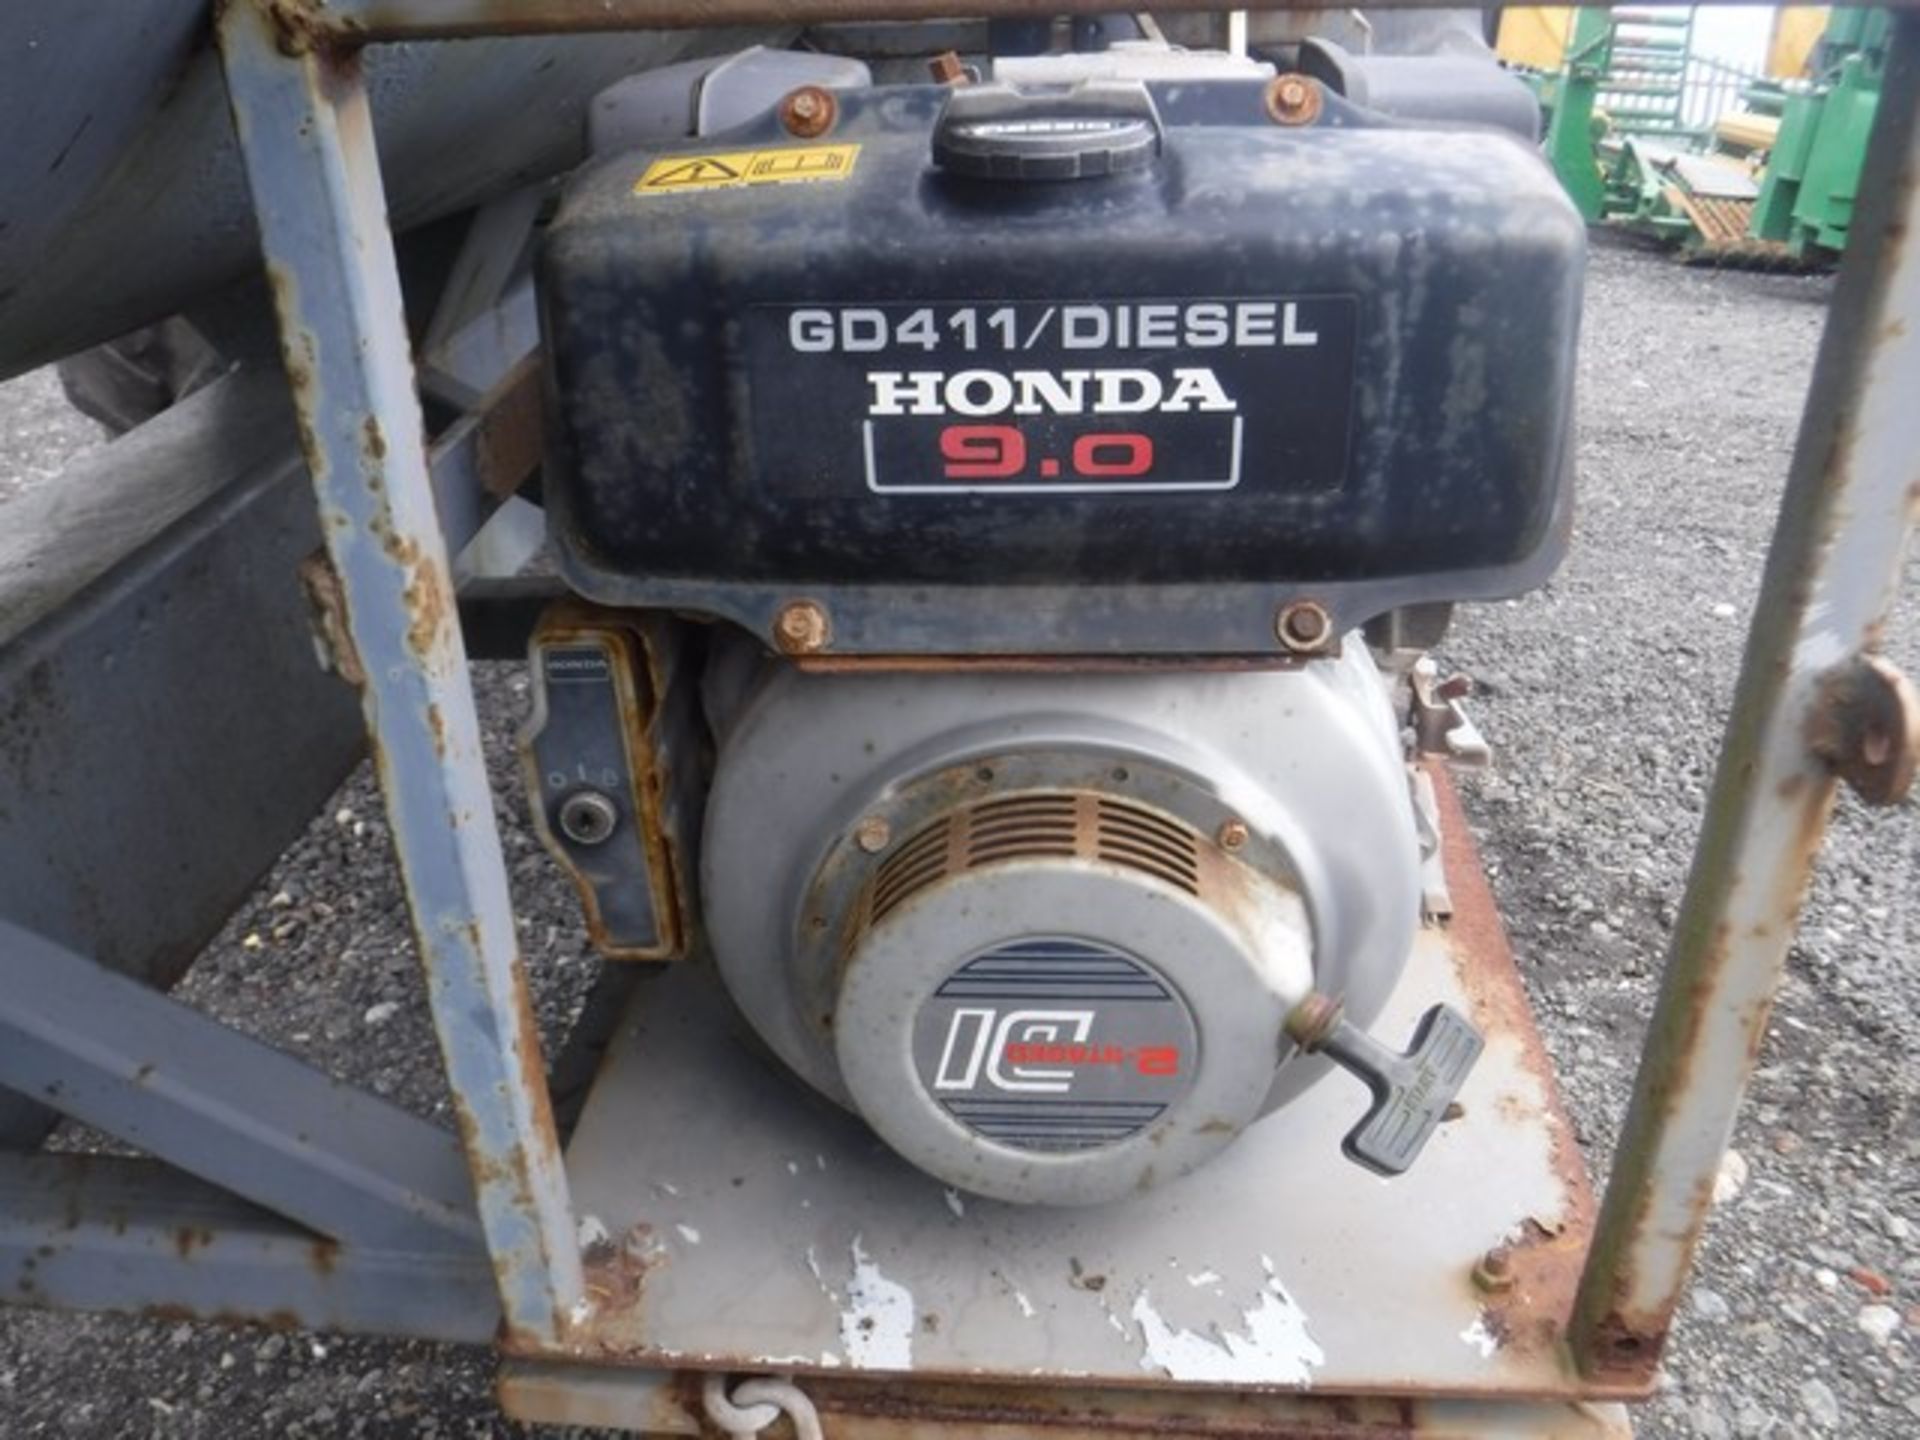 WATER BOWSER trailer, c/w GD411 diesel Honda engine. Tow hitch has been repaired. - Image 3 of 11